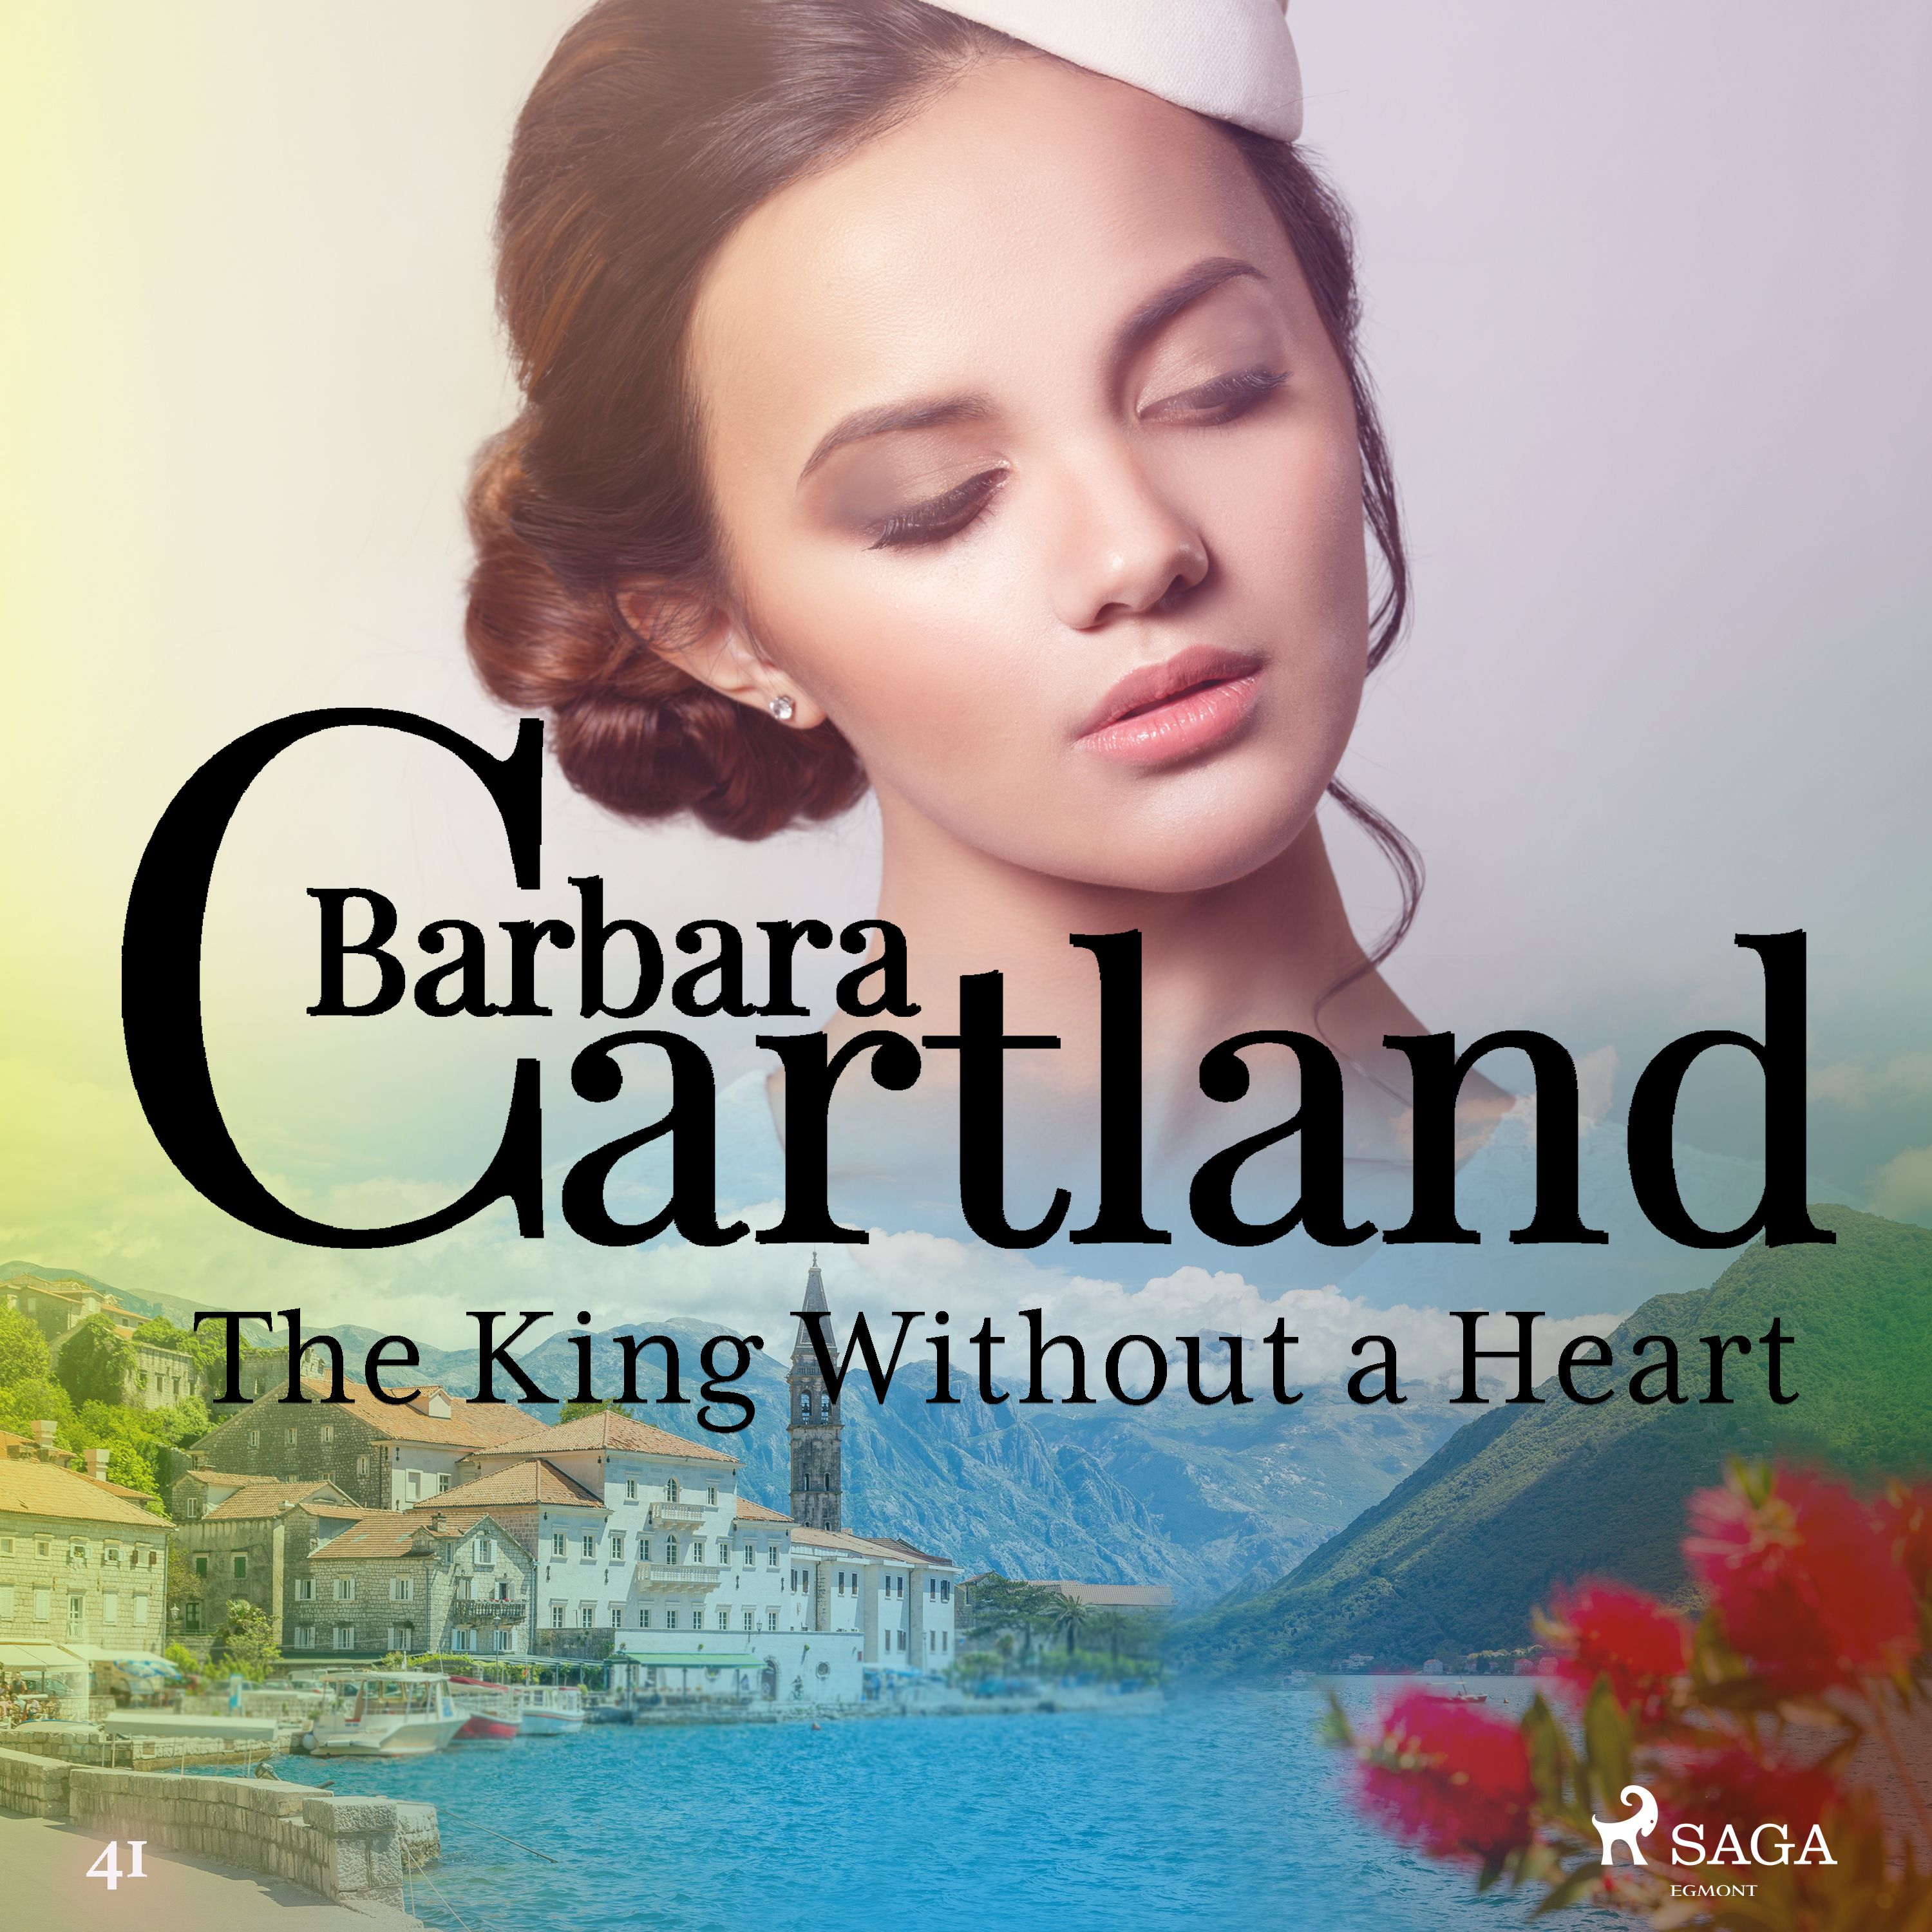 The King without a Heart, audiobook by Barbara Cartland